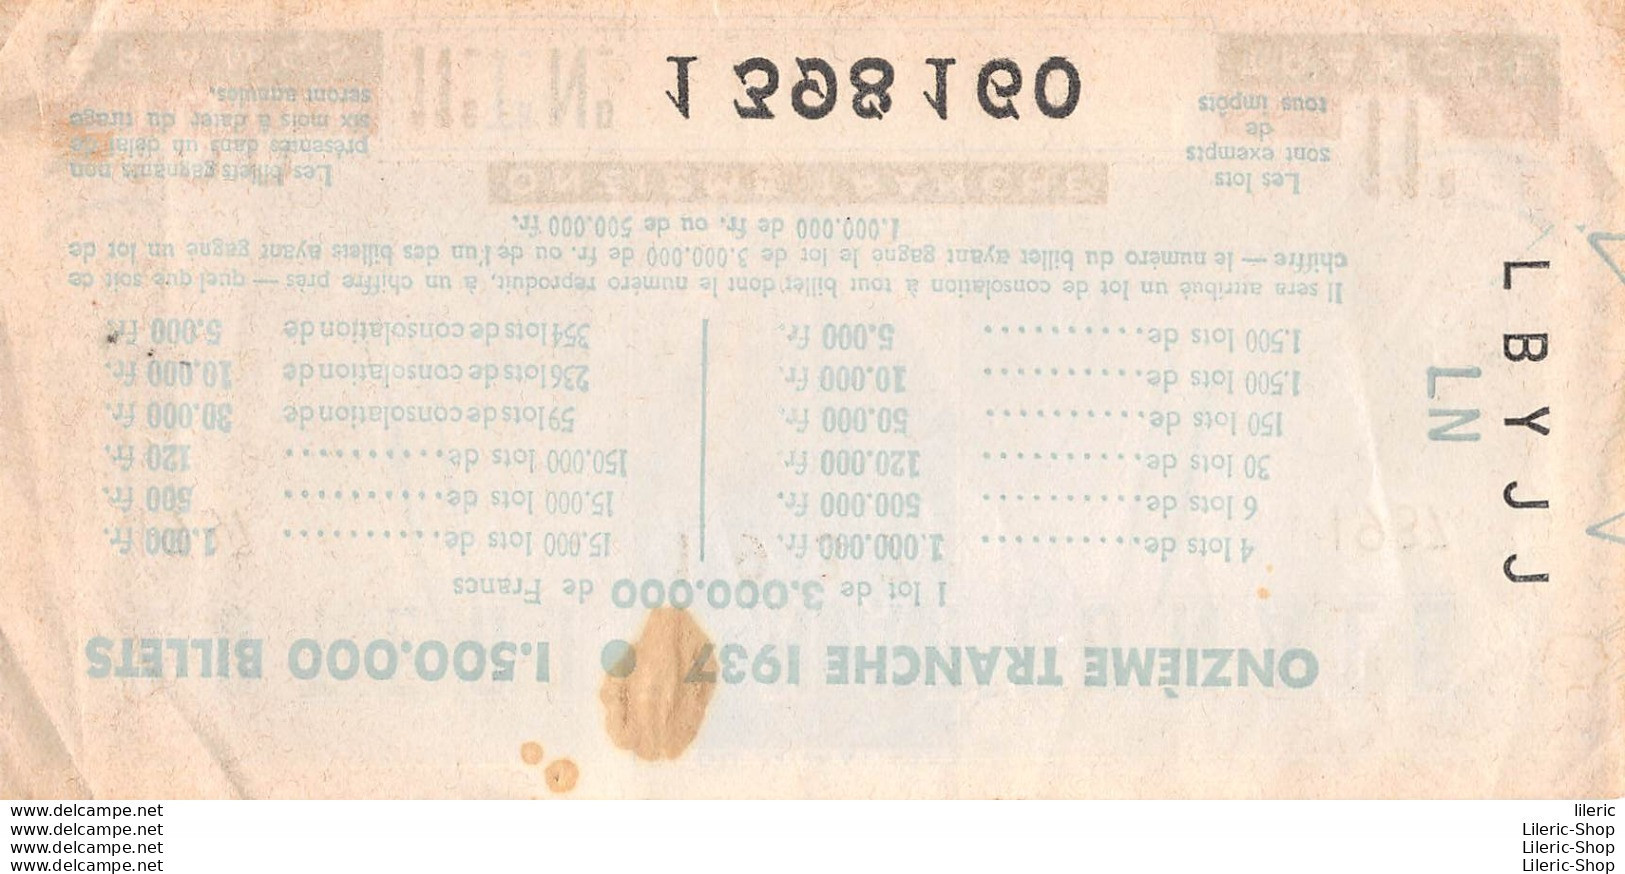 LOTERIE NATIONALE  // TICKET ONZIEME TRANCHE 100 FRANCS ANNEE 1937 - Lottery Tickets